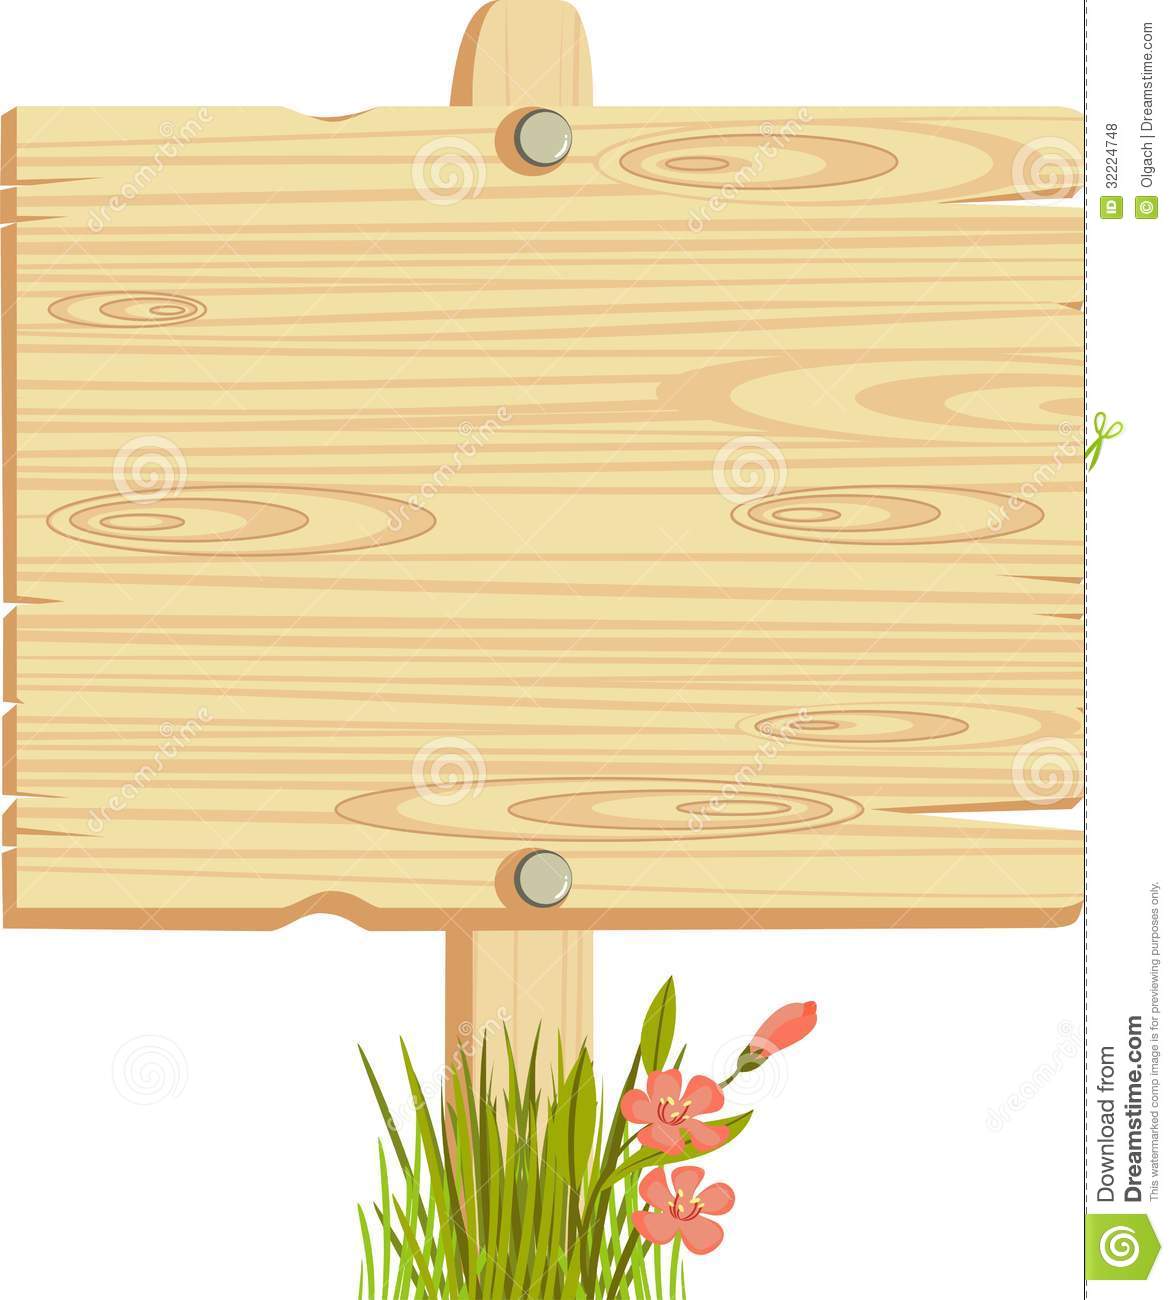 Wooden blank sign clipart